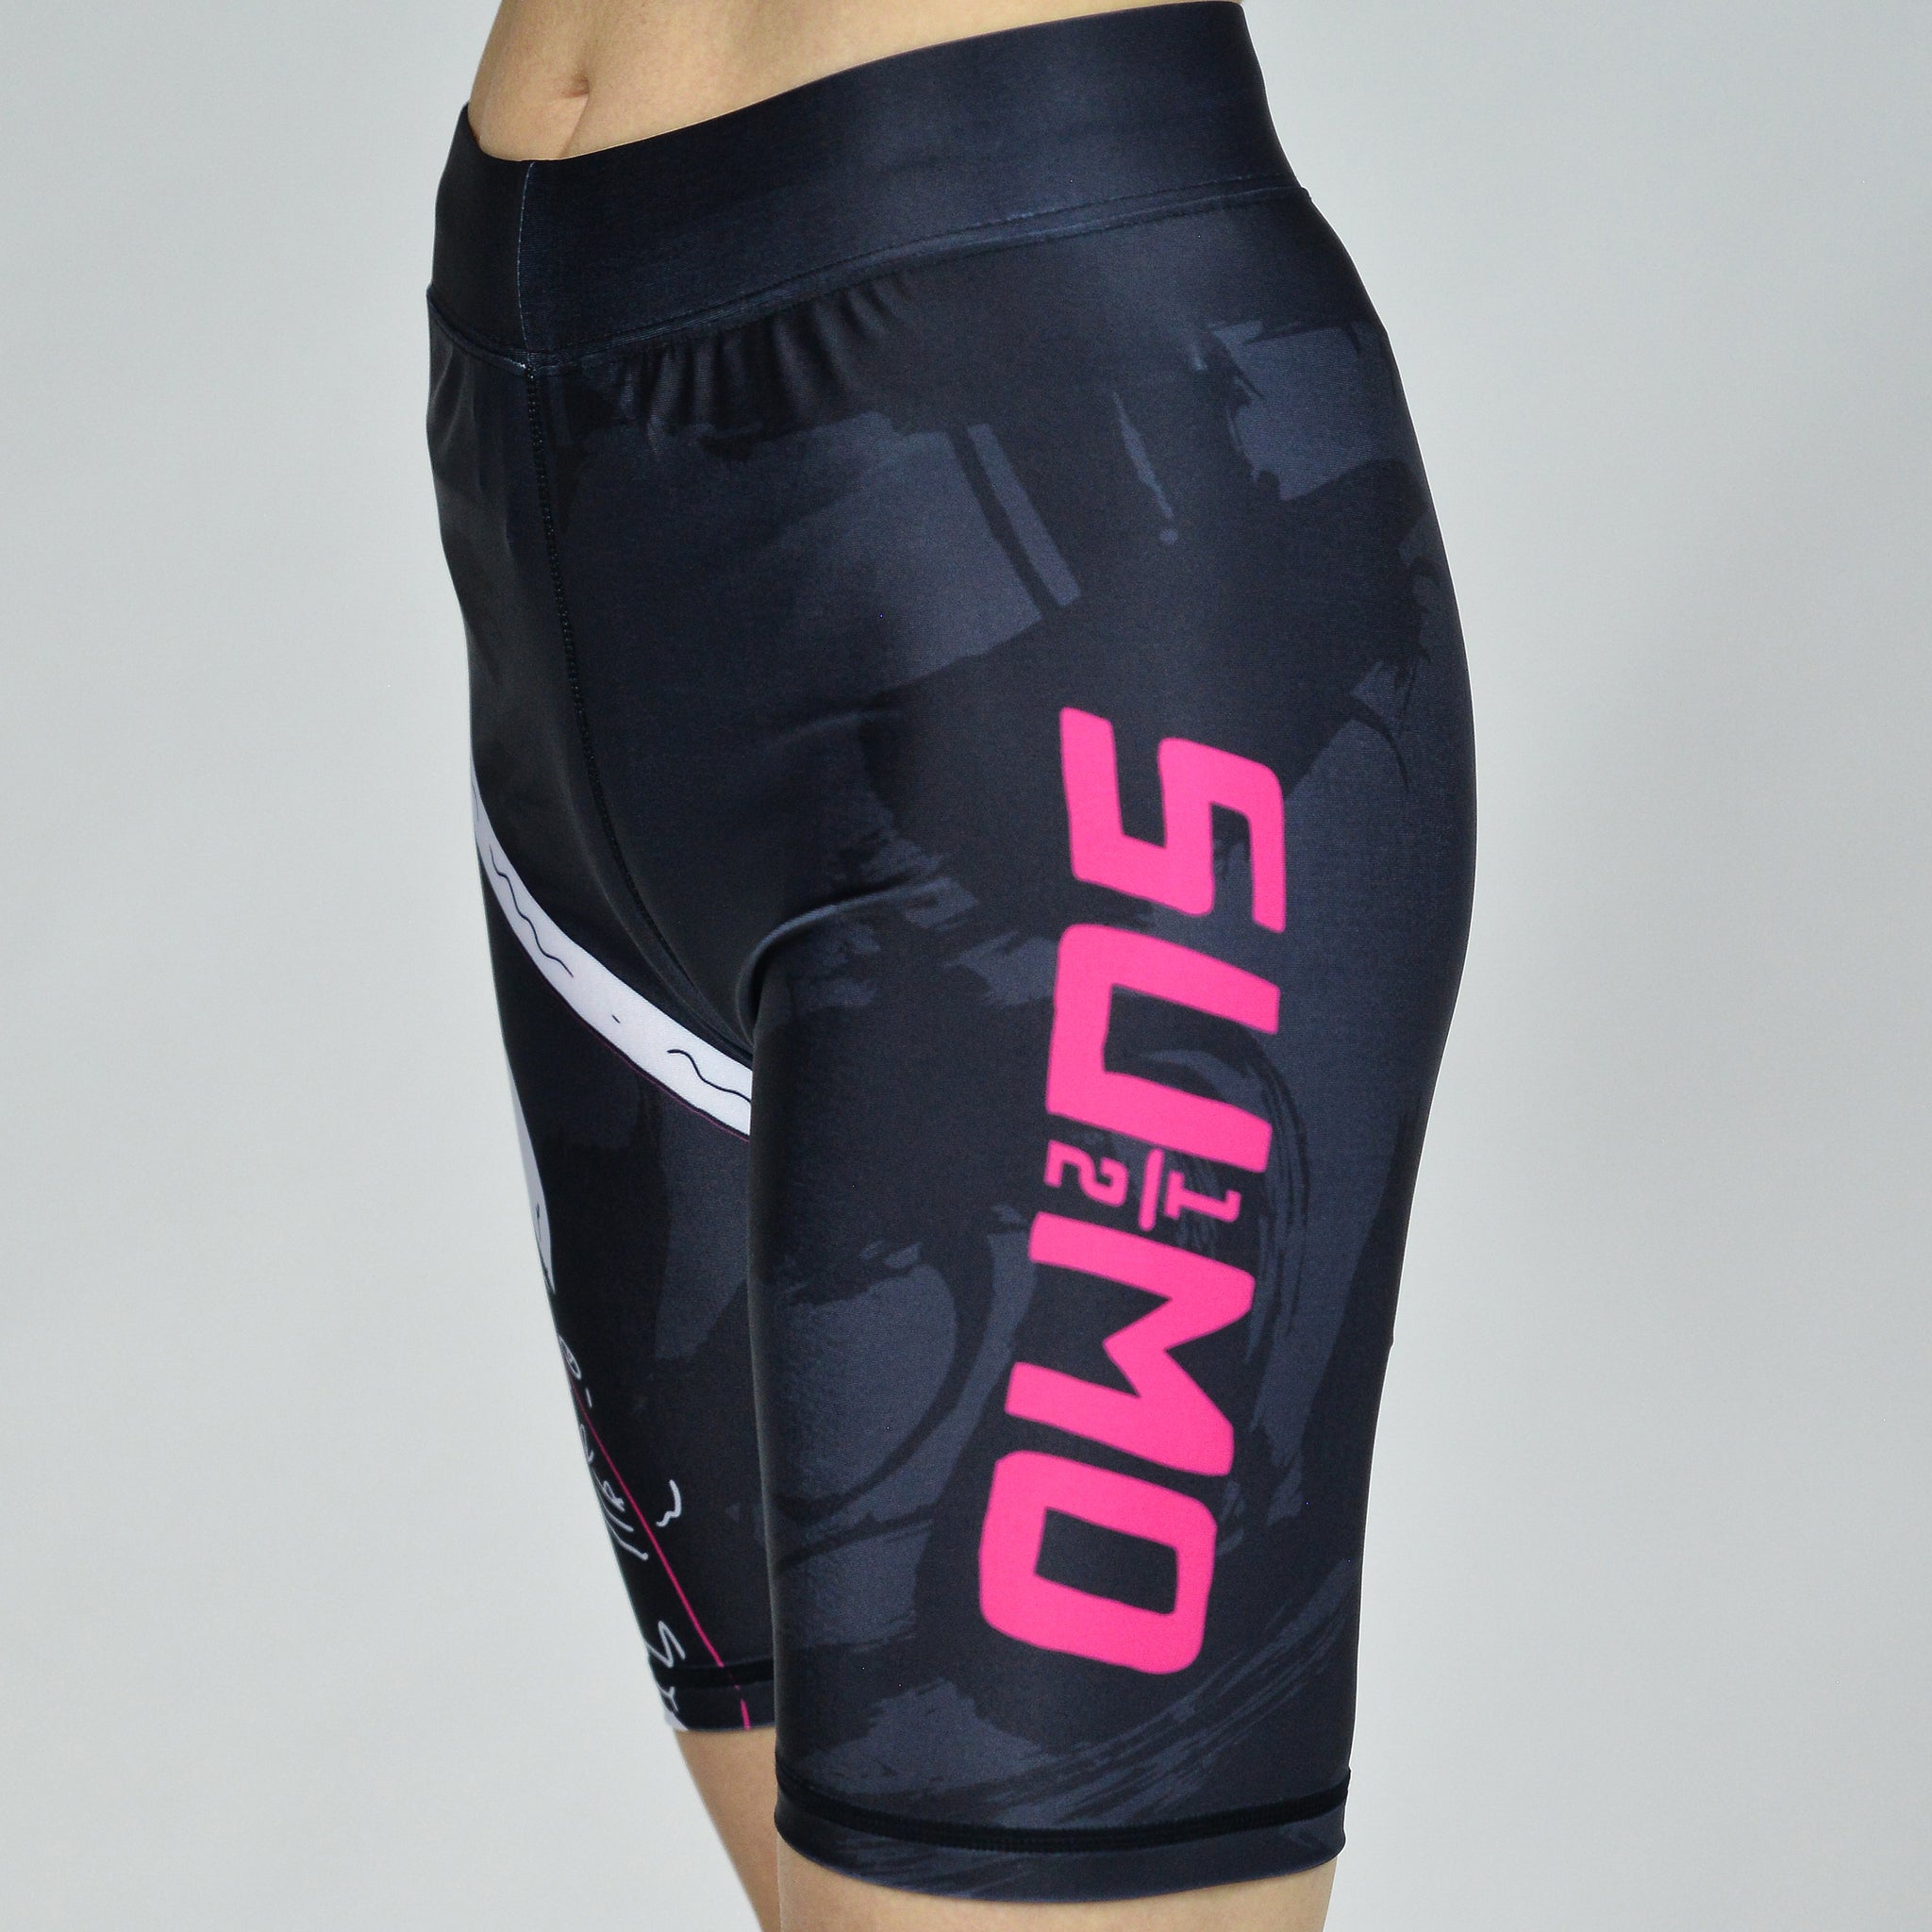 Onna Neon Compression Shorts for Women